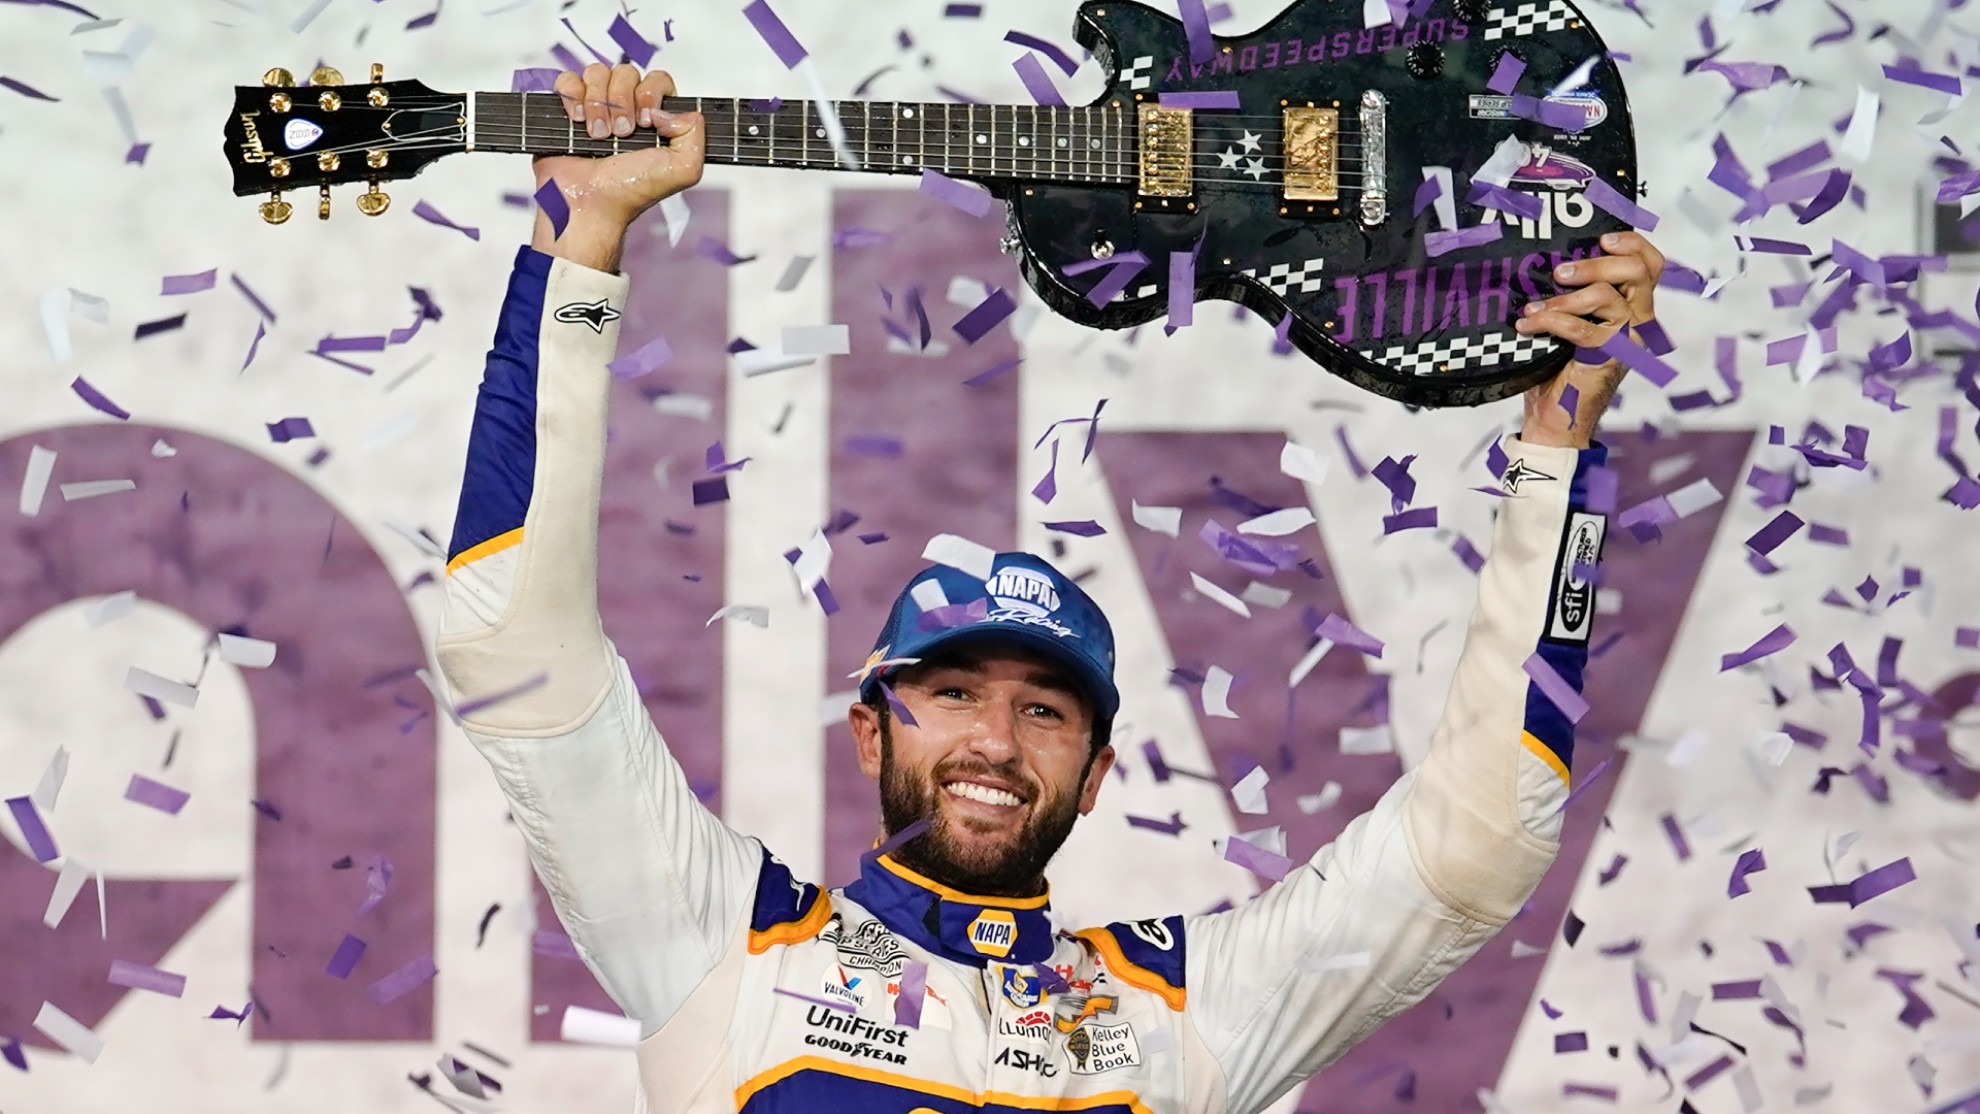 Chase Elliott holds the guitar presented to him after winning a NASCAR Cup Series auto race Sunday.